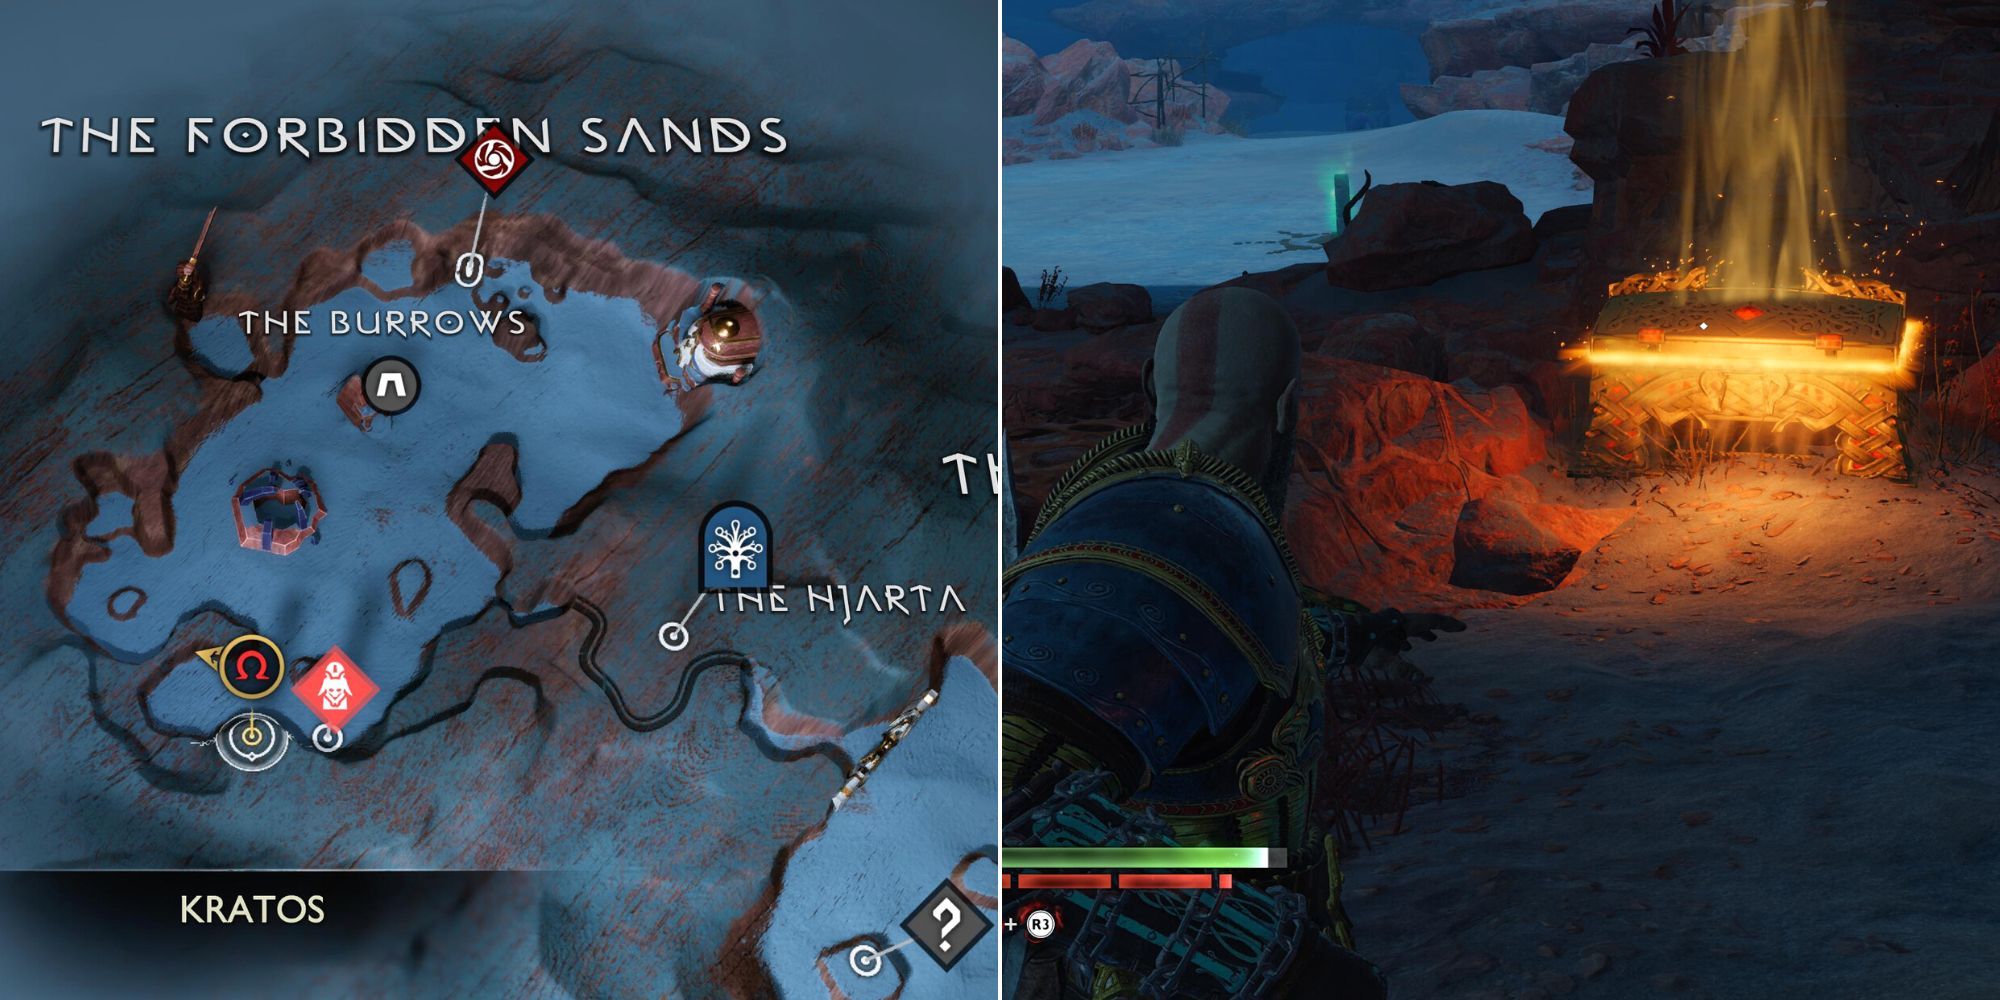 Two photos. The left is the map location at The Forbidden Sands, the right is Kratos standing near a legendary chest.